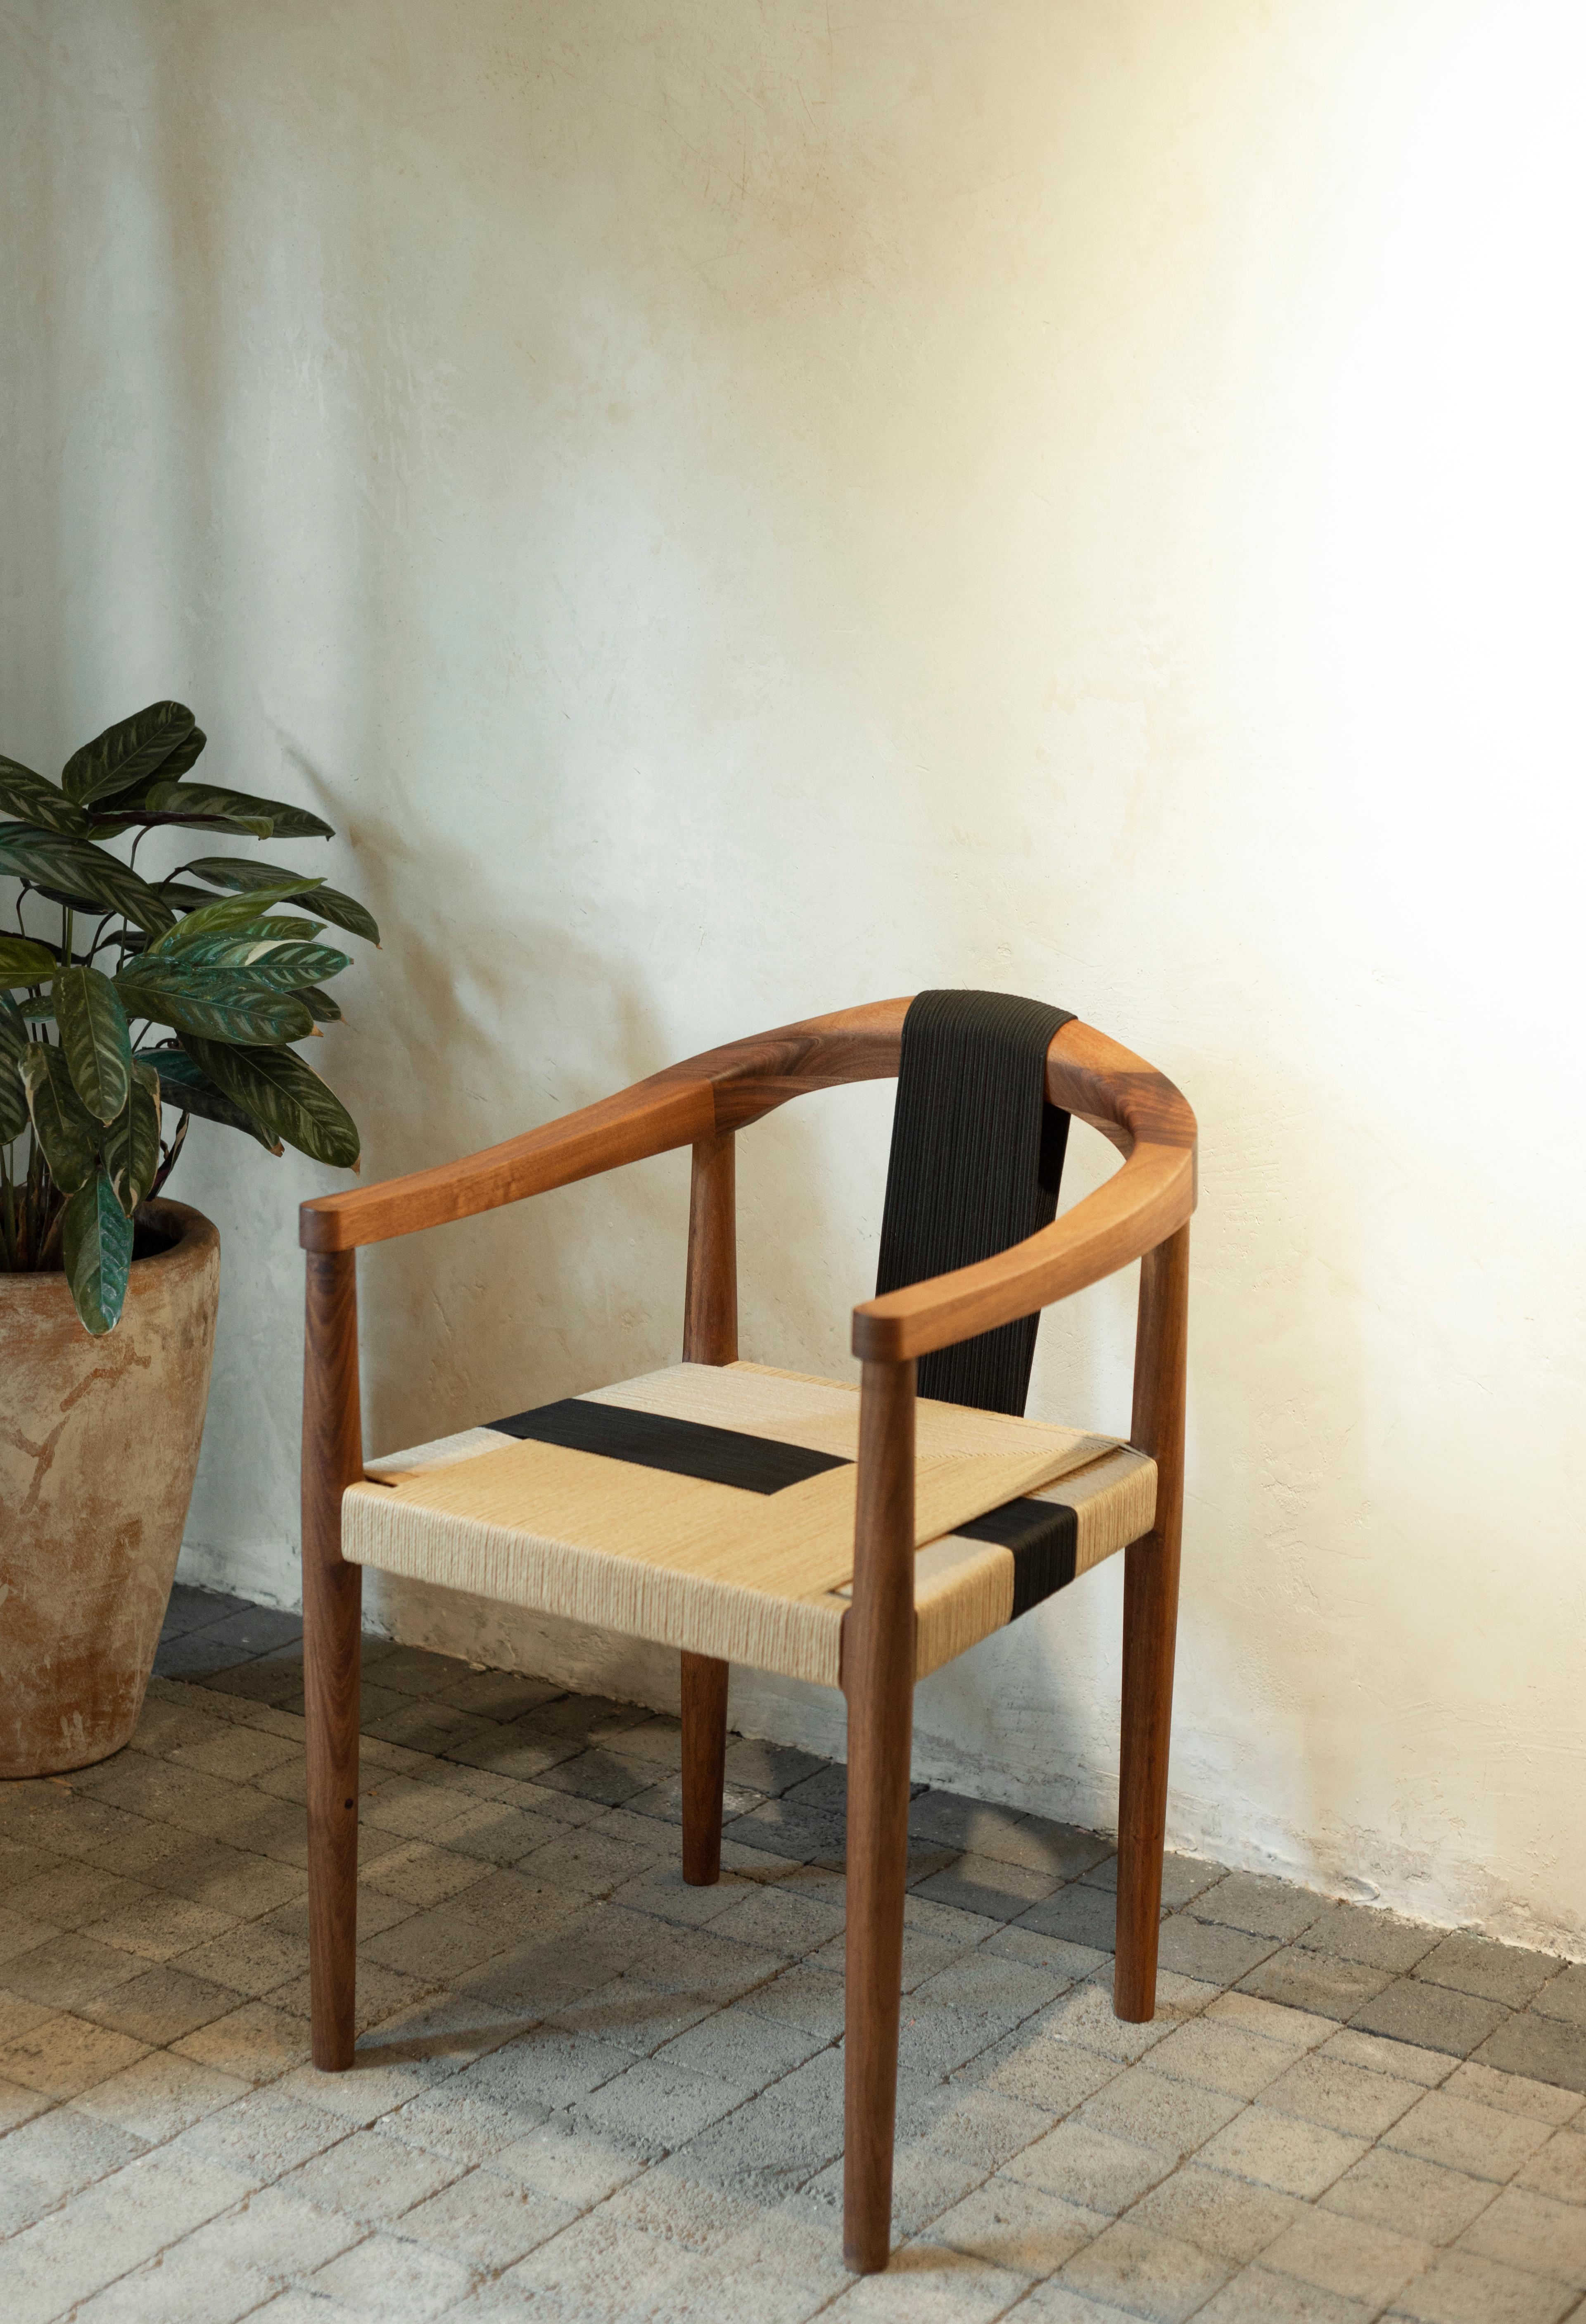 Contemporary Emma Chair in Tzalam Wood and Paper Cord Weave by Tana Karei For Sale